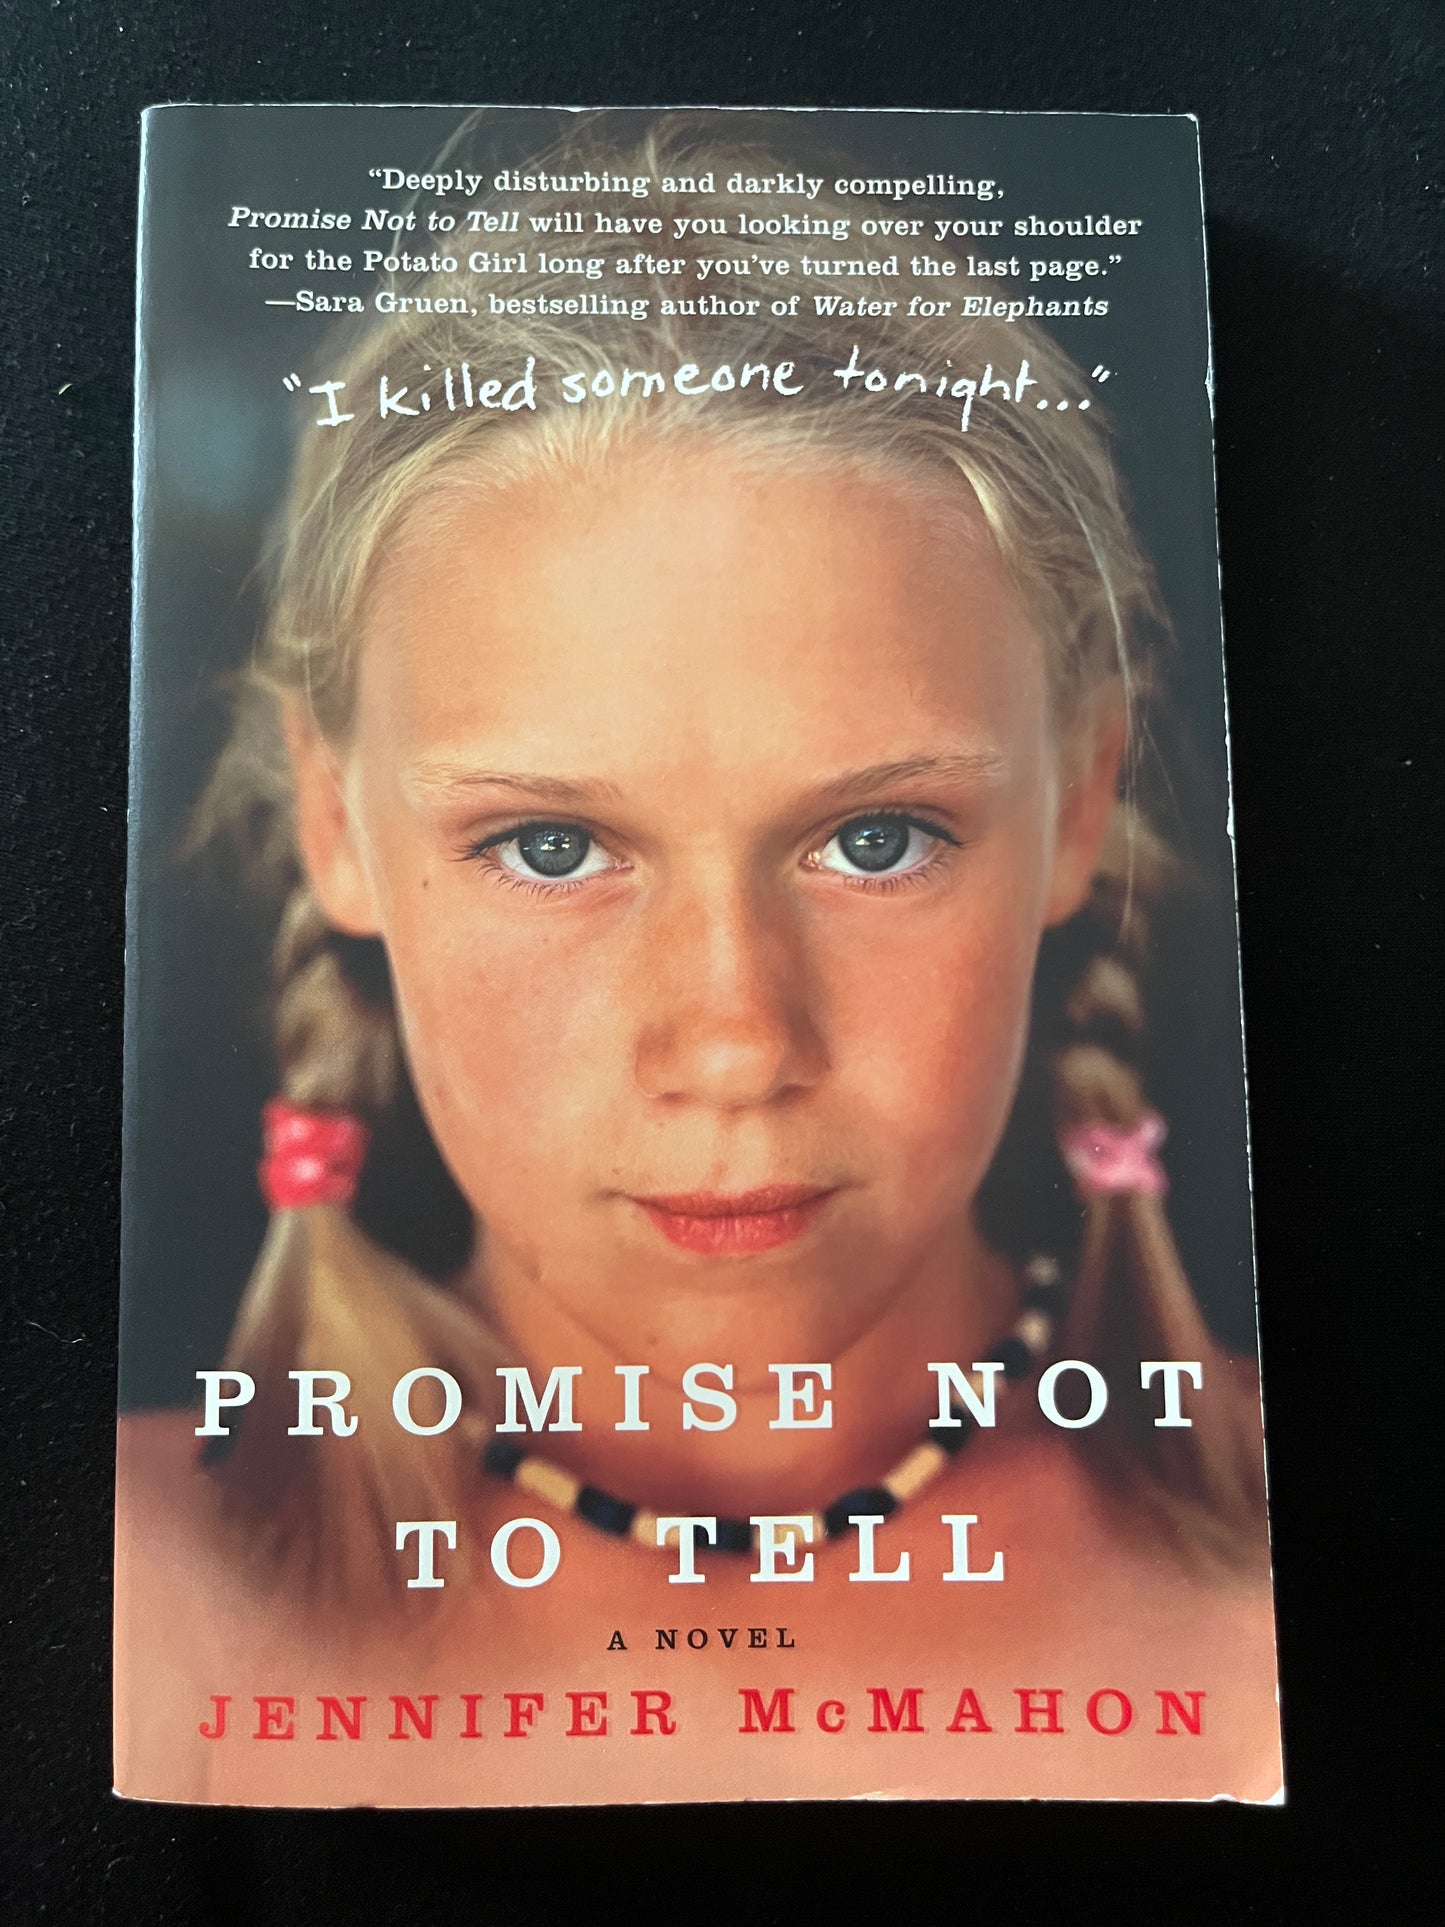 PROMISE NOT TO TELL by Jennifer McMahon